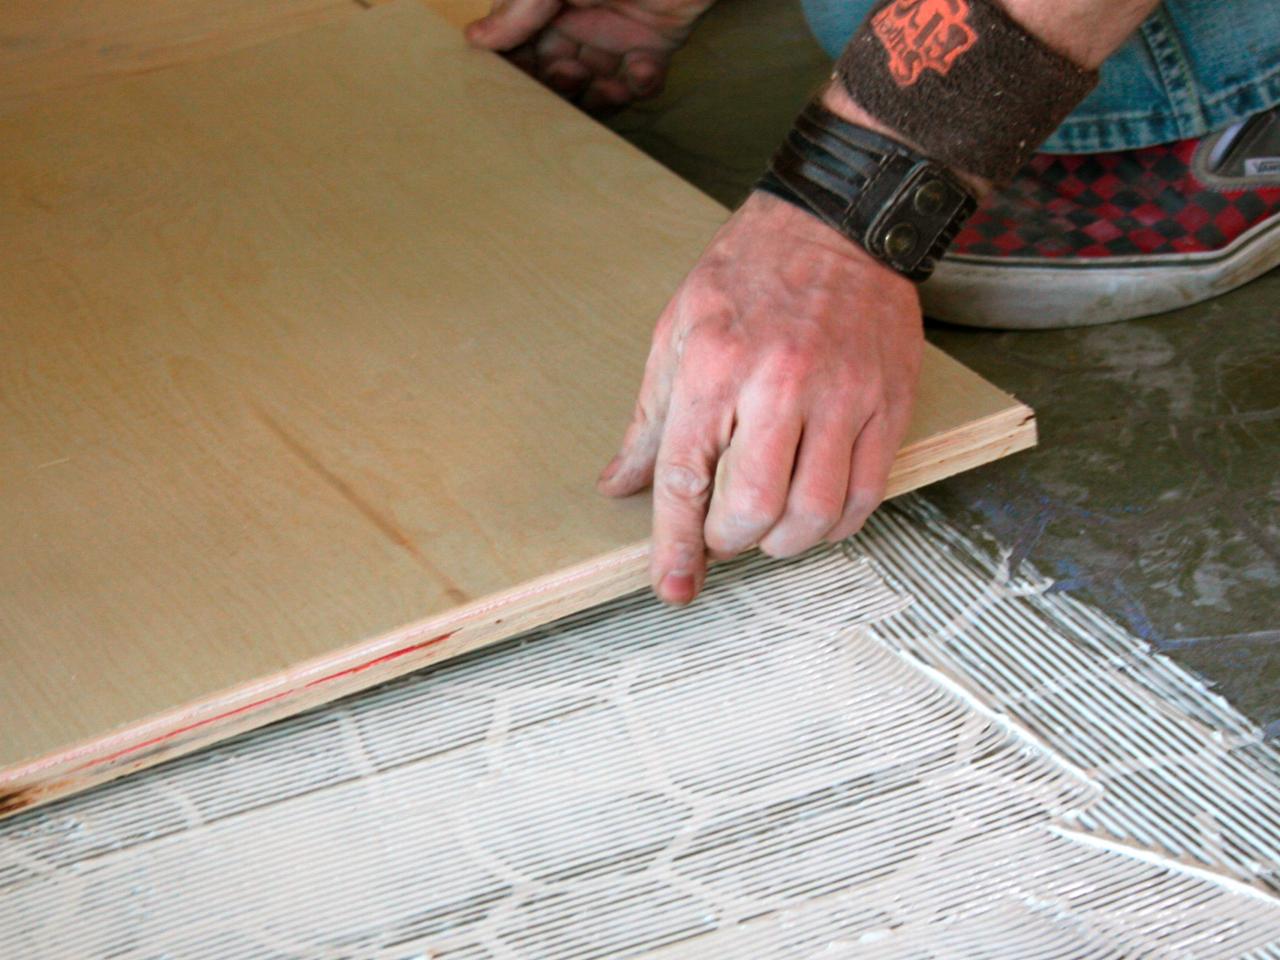 How To Install Plywood Floor Tiles, Tiling A Floor Over Plywood